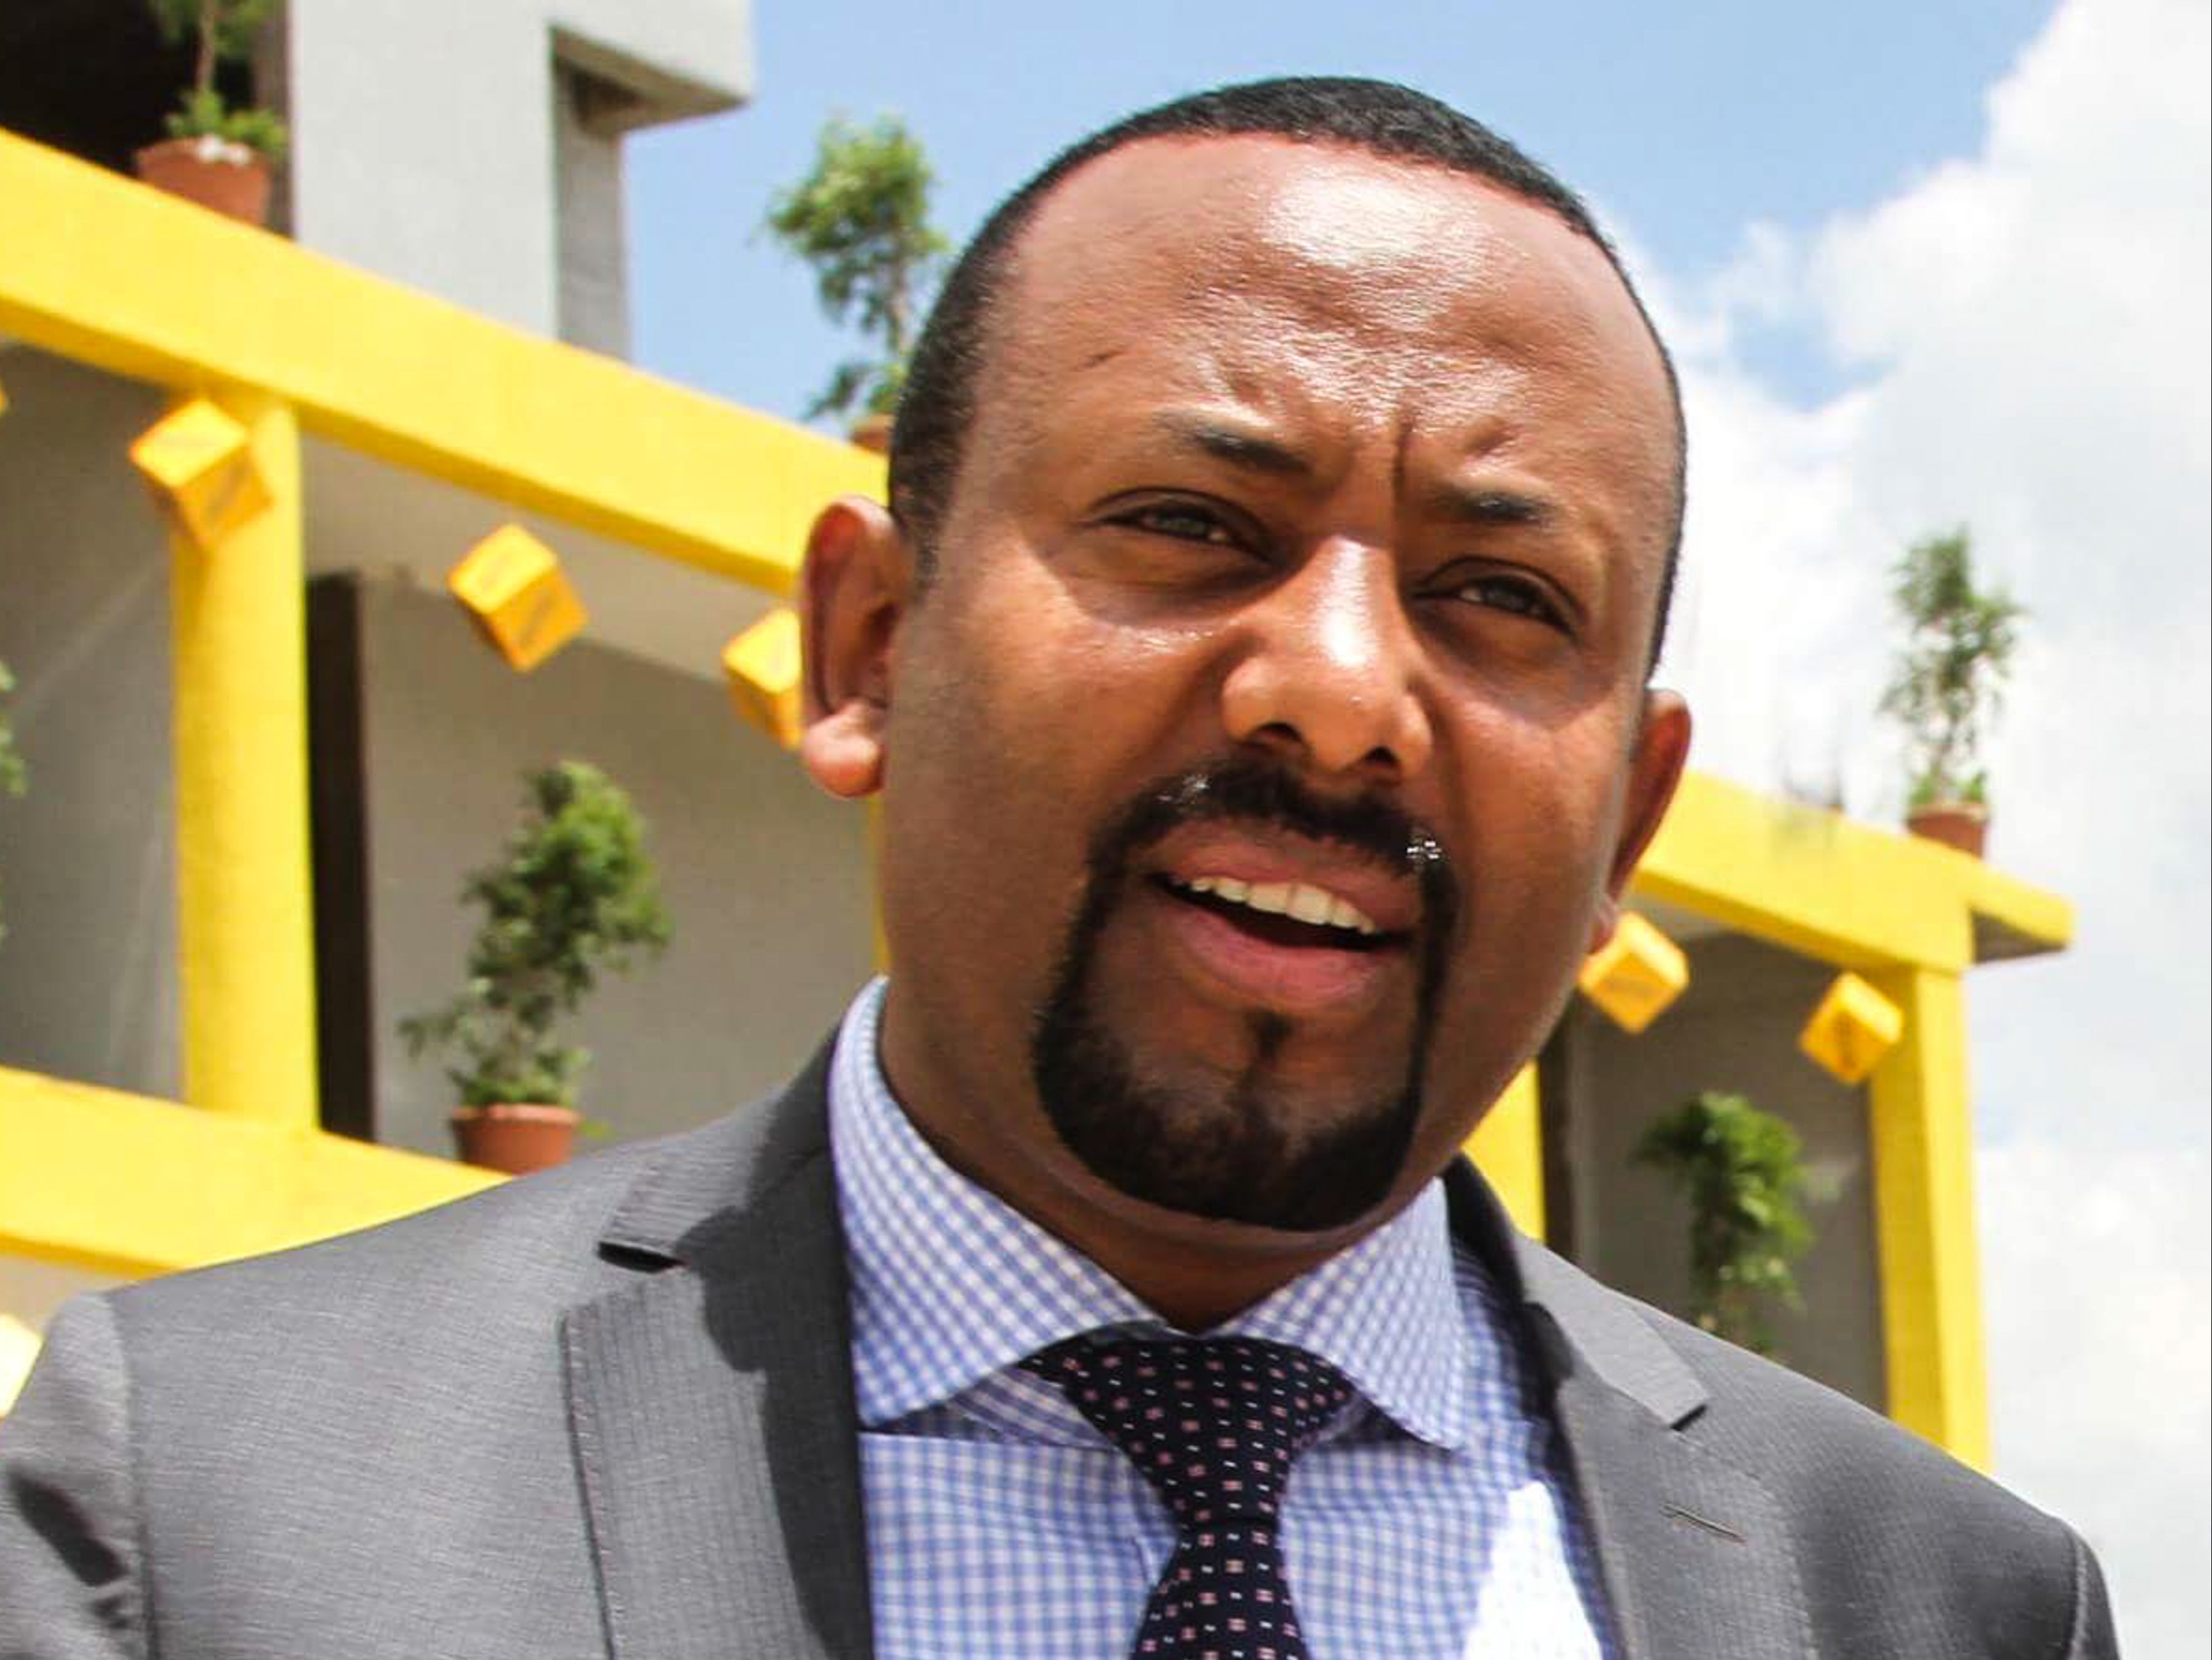 Ethiopian prime minister Abiy Ahmed has mobilised the nation’s troops as country veers towards civil war